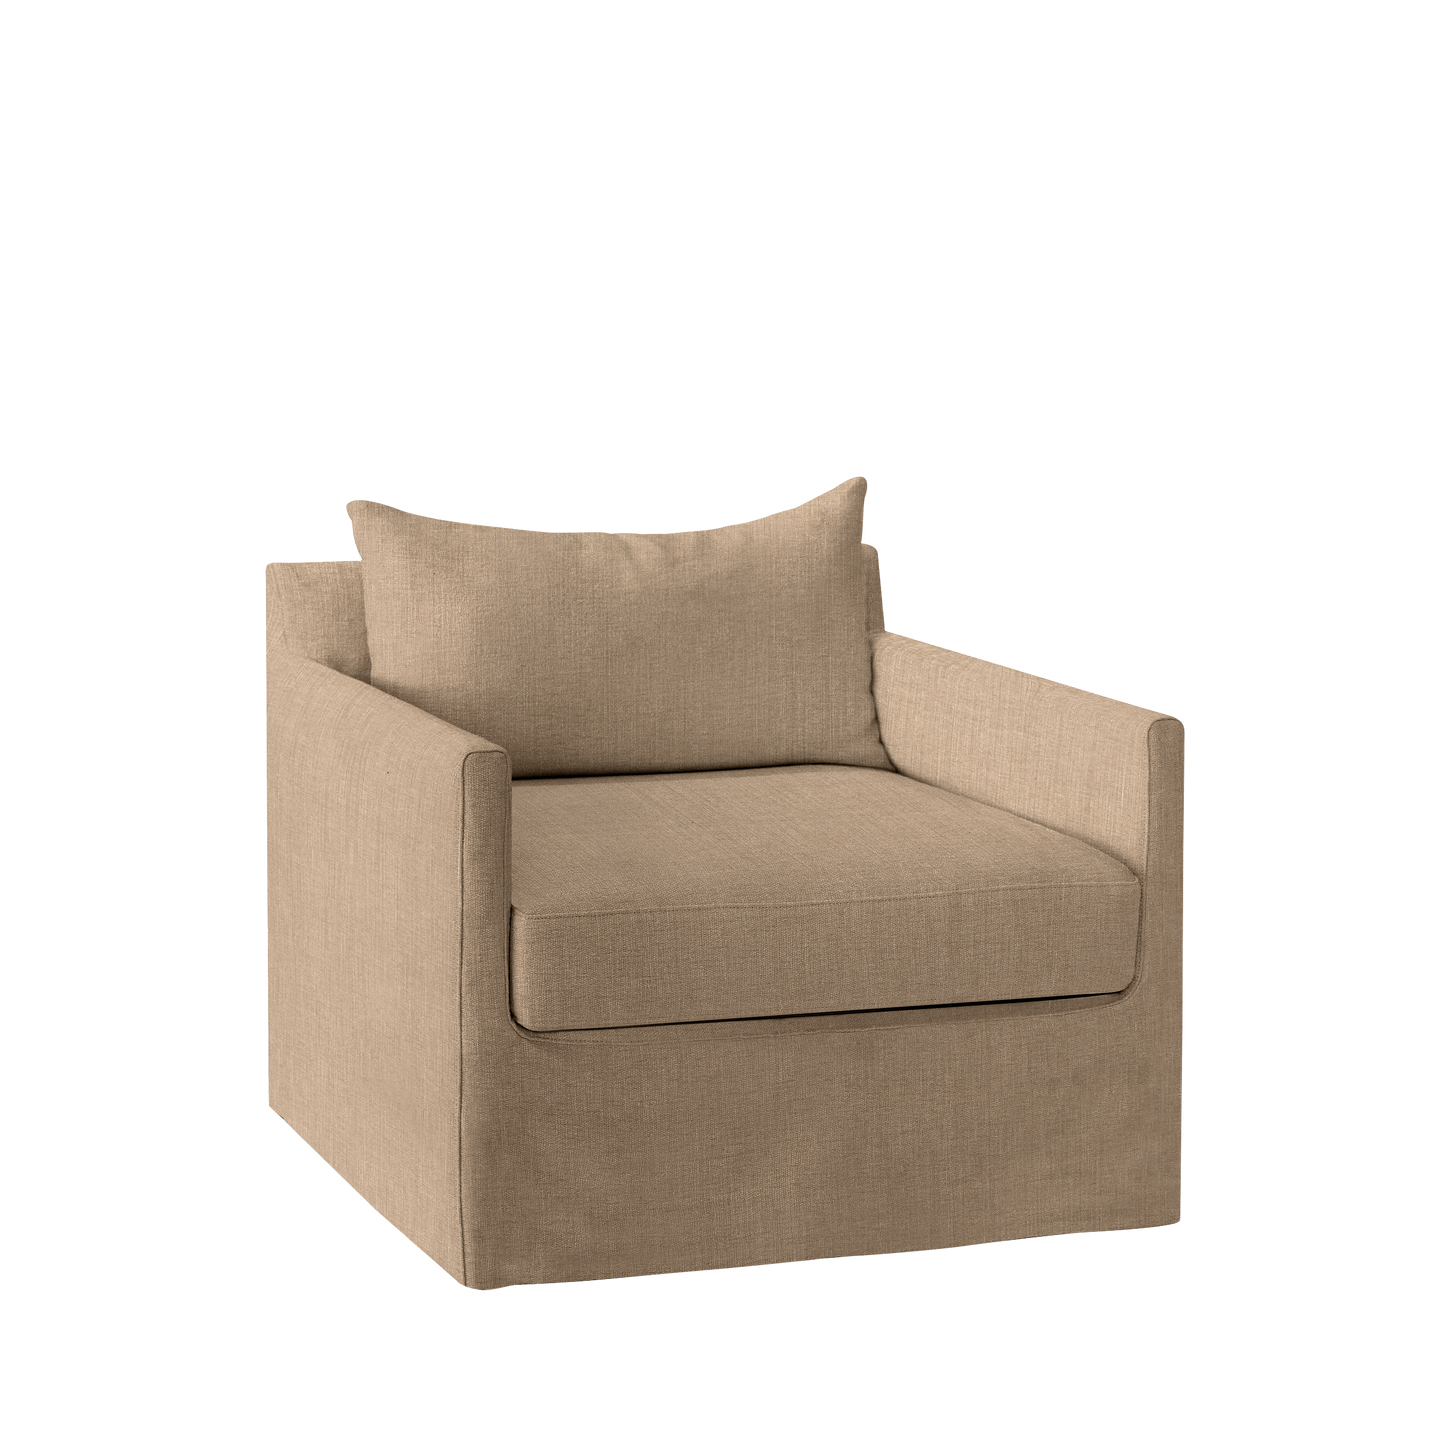 Extra wide Alba lounge chair with khaki textile